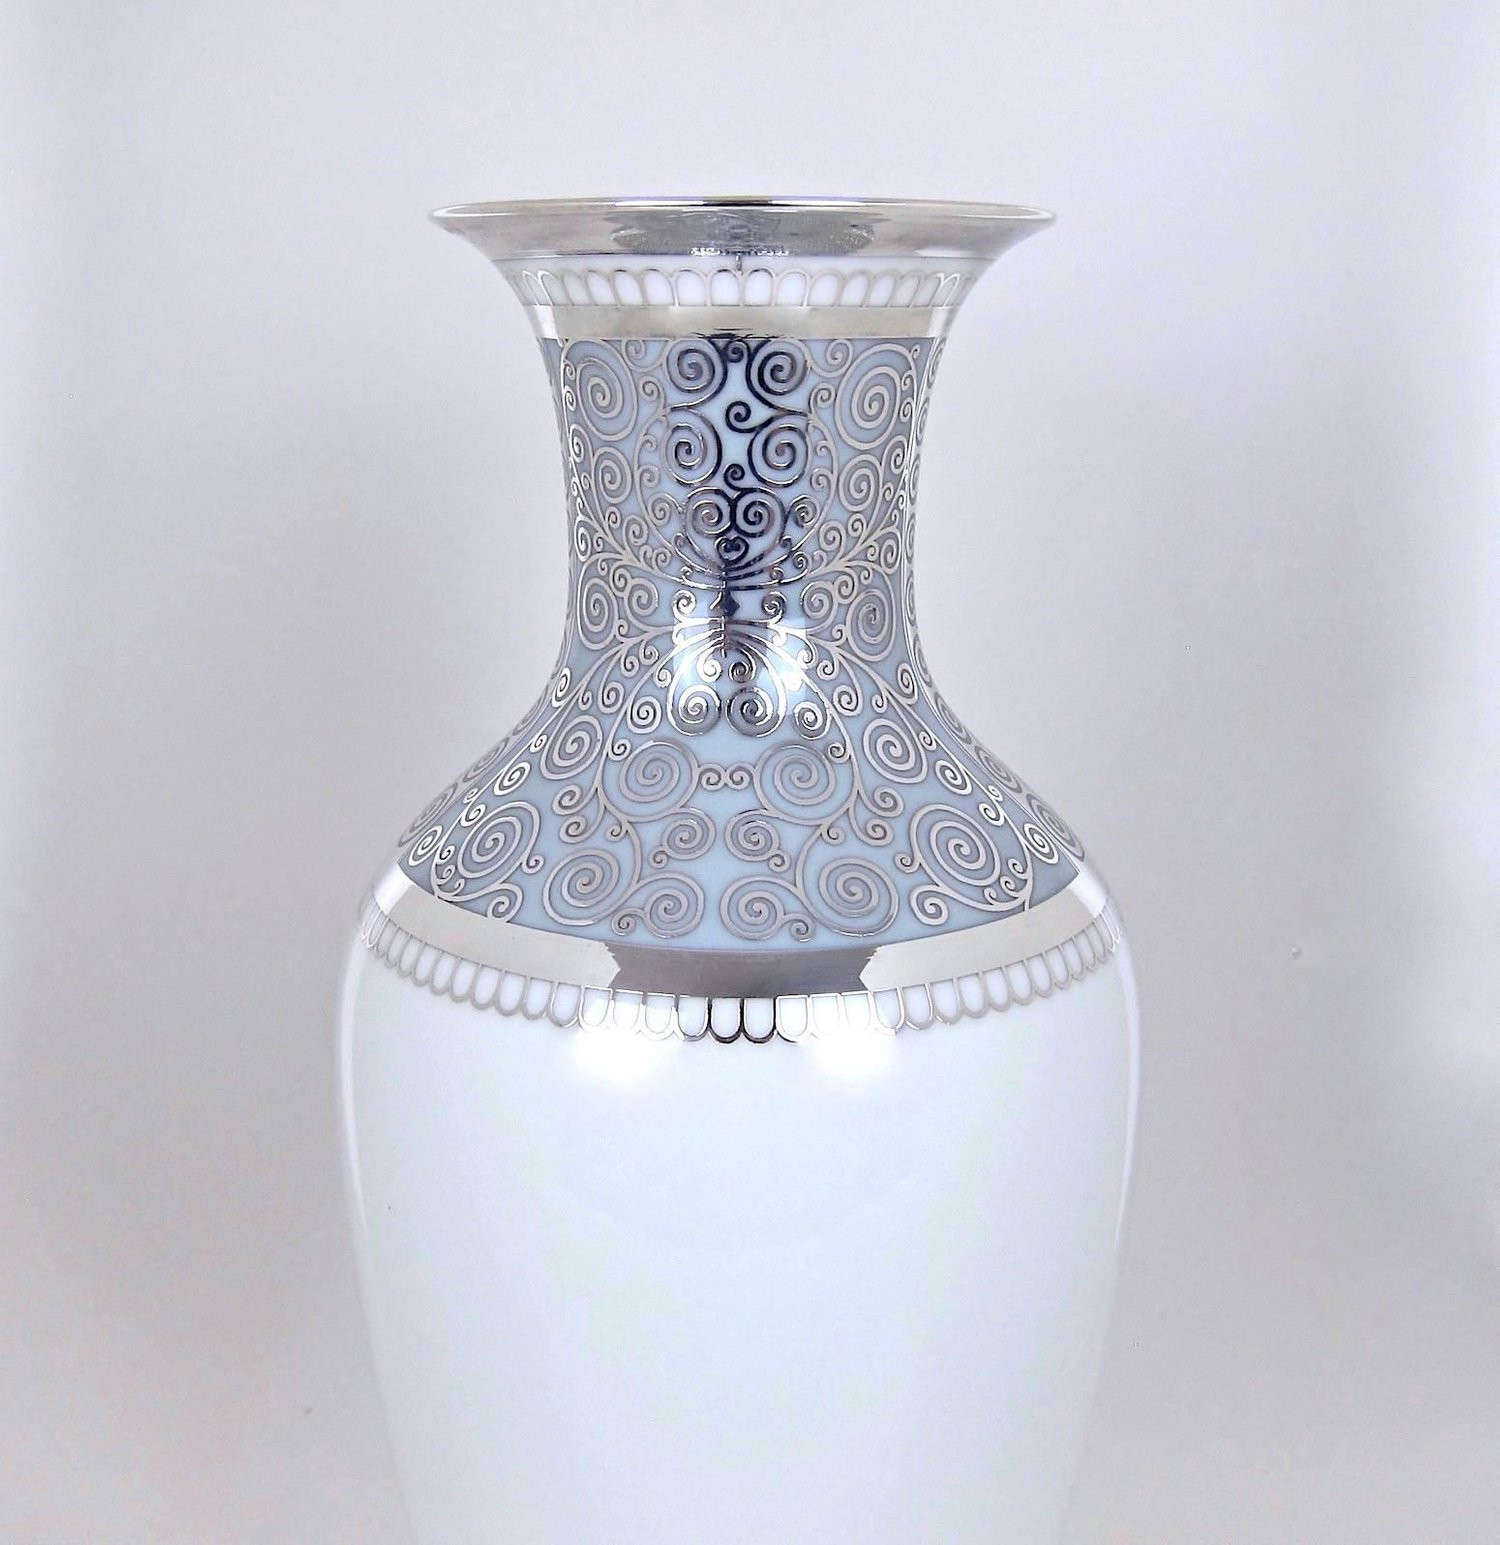 11 Spectacular Art Deco Vases Antique 2024 free download art deco vases antique of large rosenthal porcelain silver overlay vase at 1stdibs pertaining to rosenthal porcelain silver overlay vase 06 master